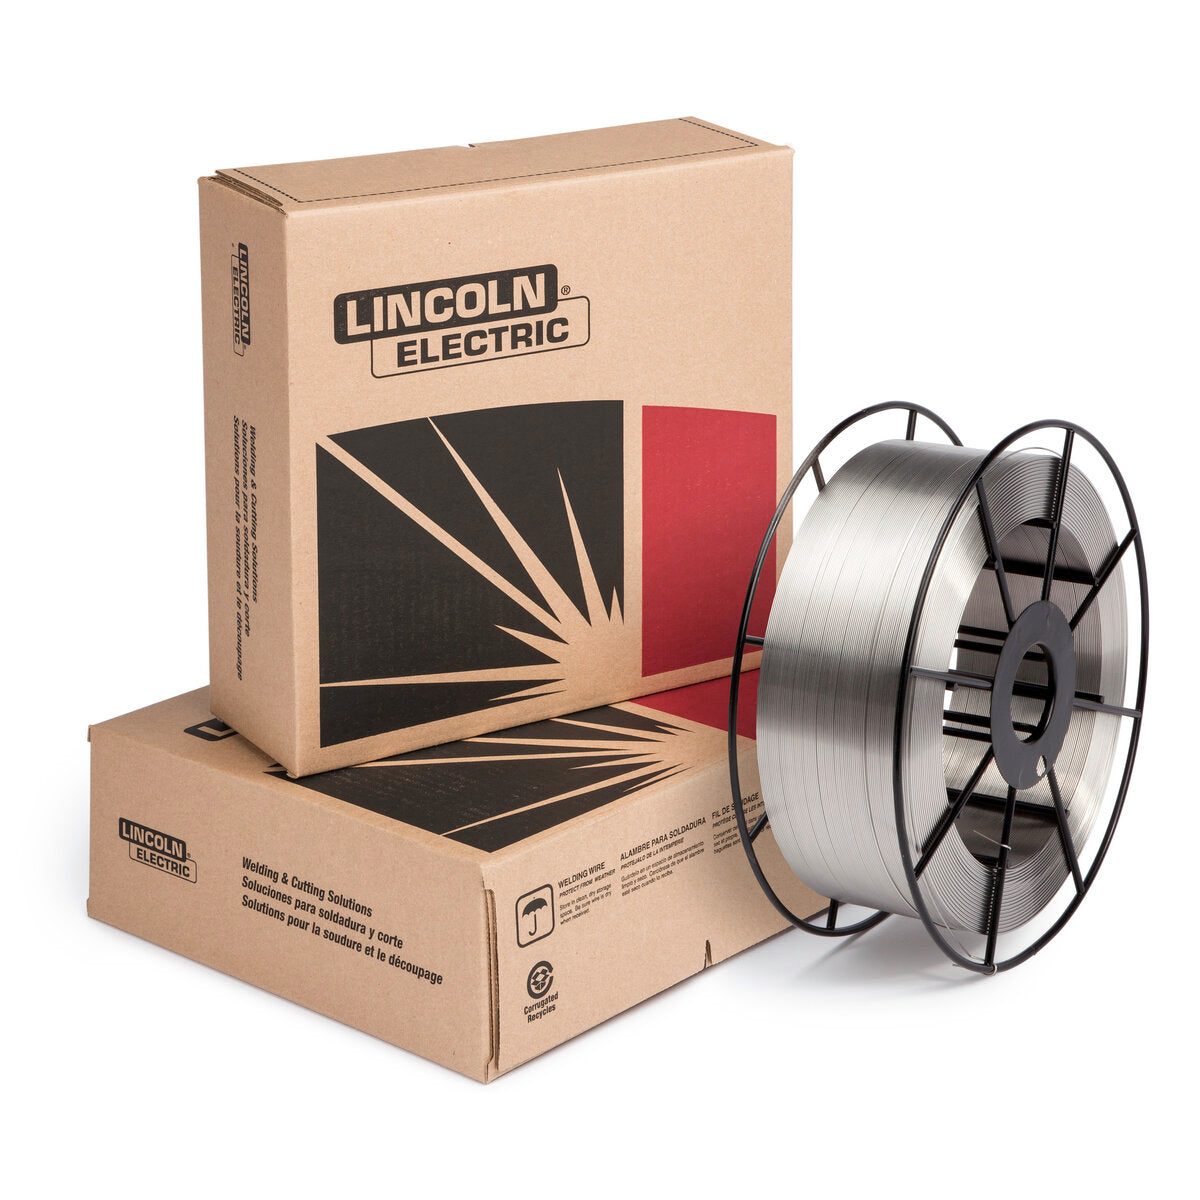 Lincoln Electric - Techalloy® 625 MIG (GMAW) Wire, 1/16 in, 33 lb Spool - MG625062667